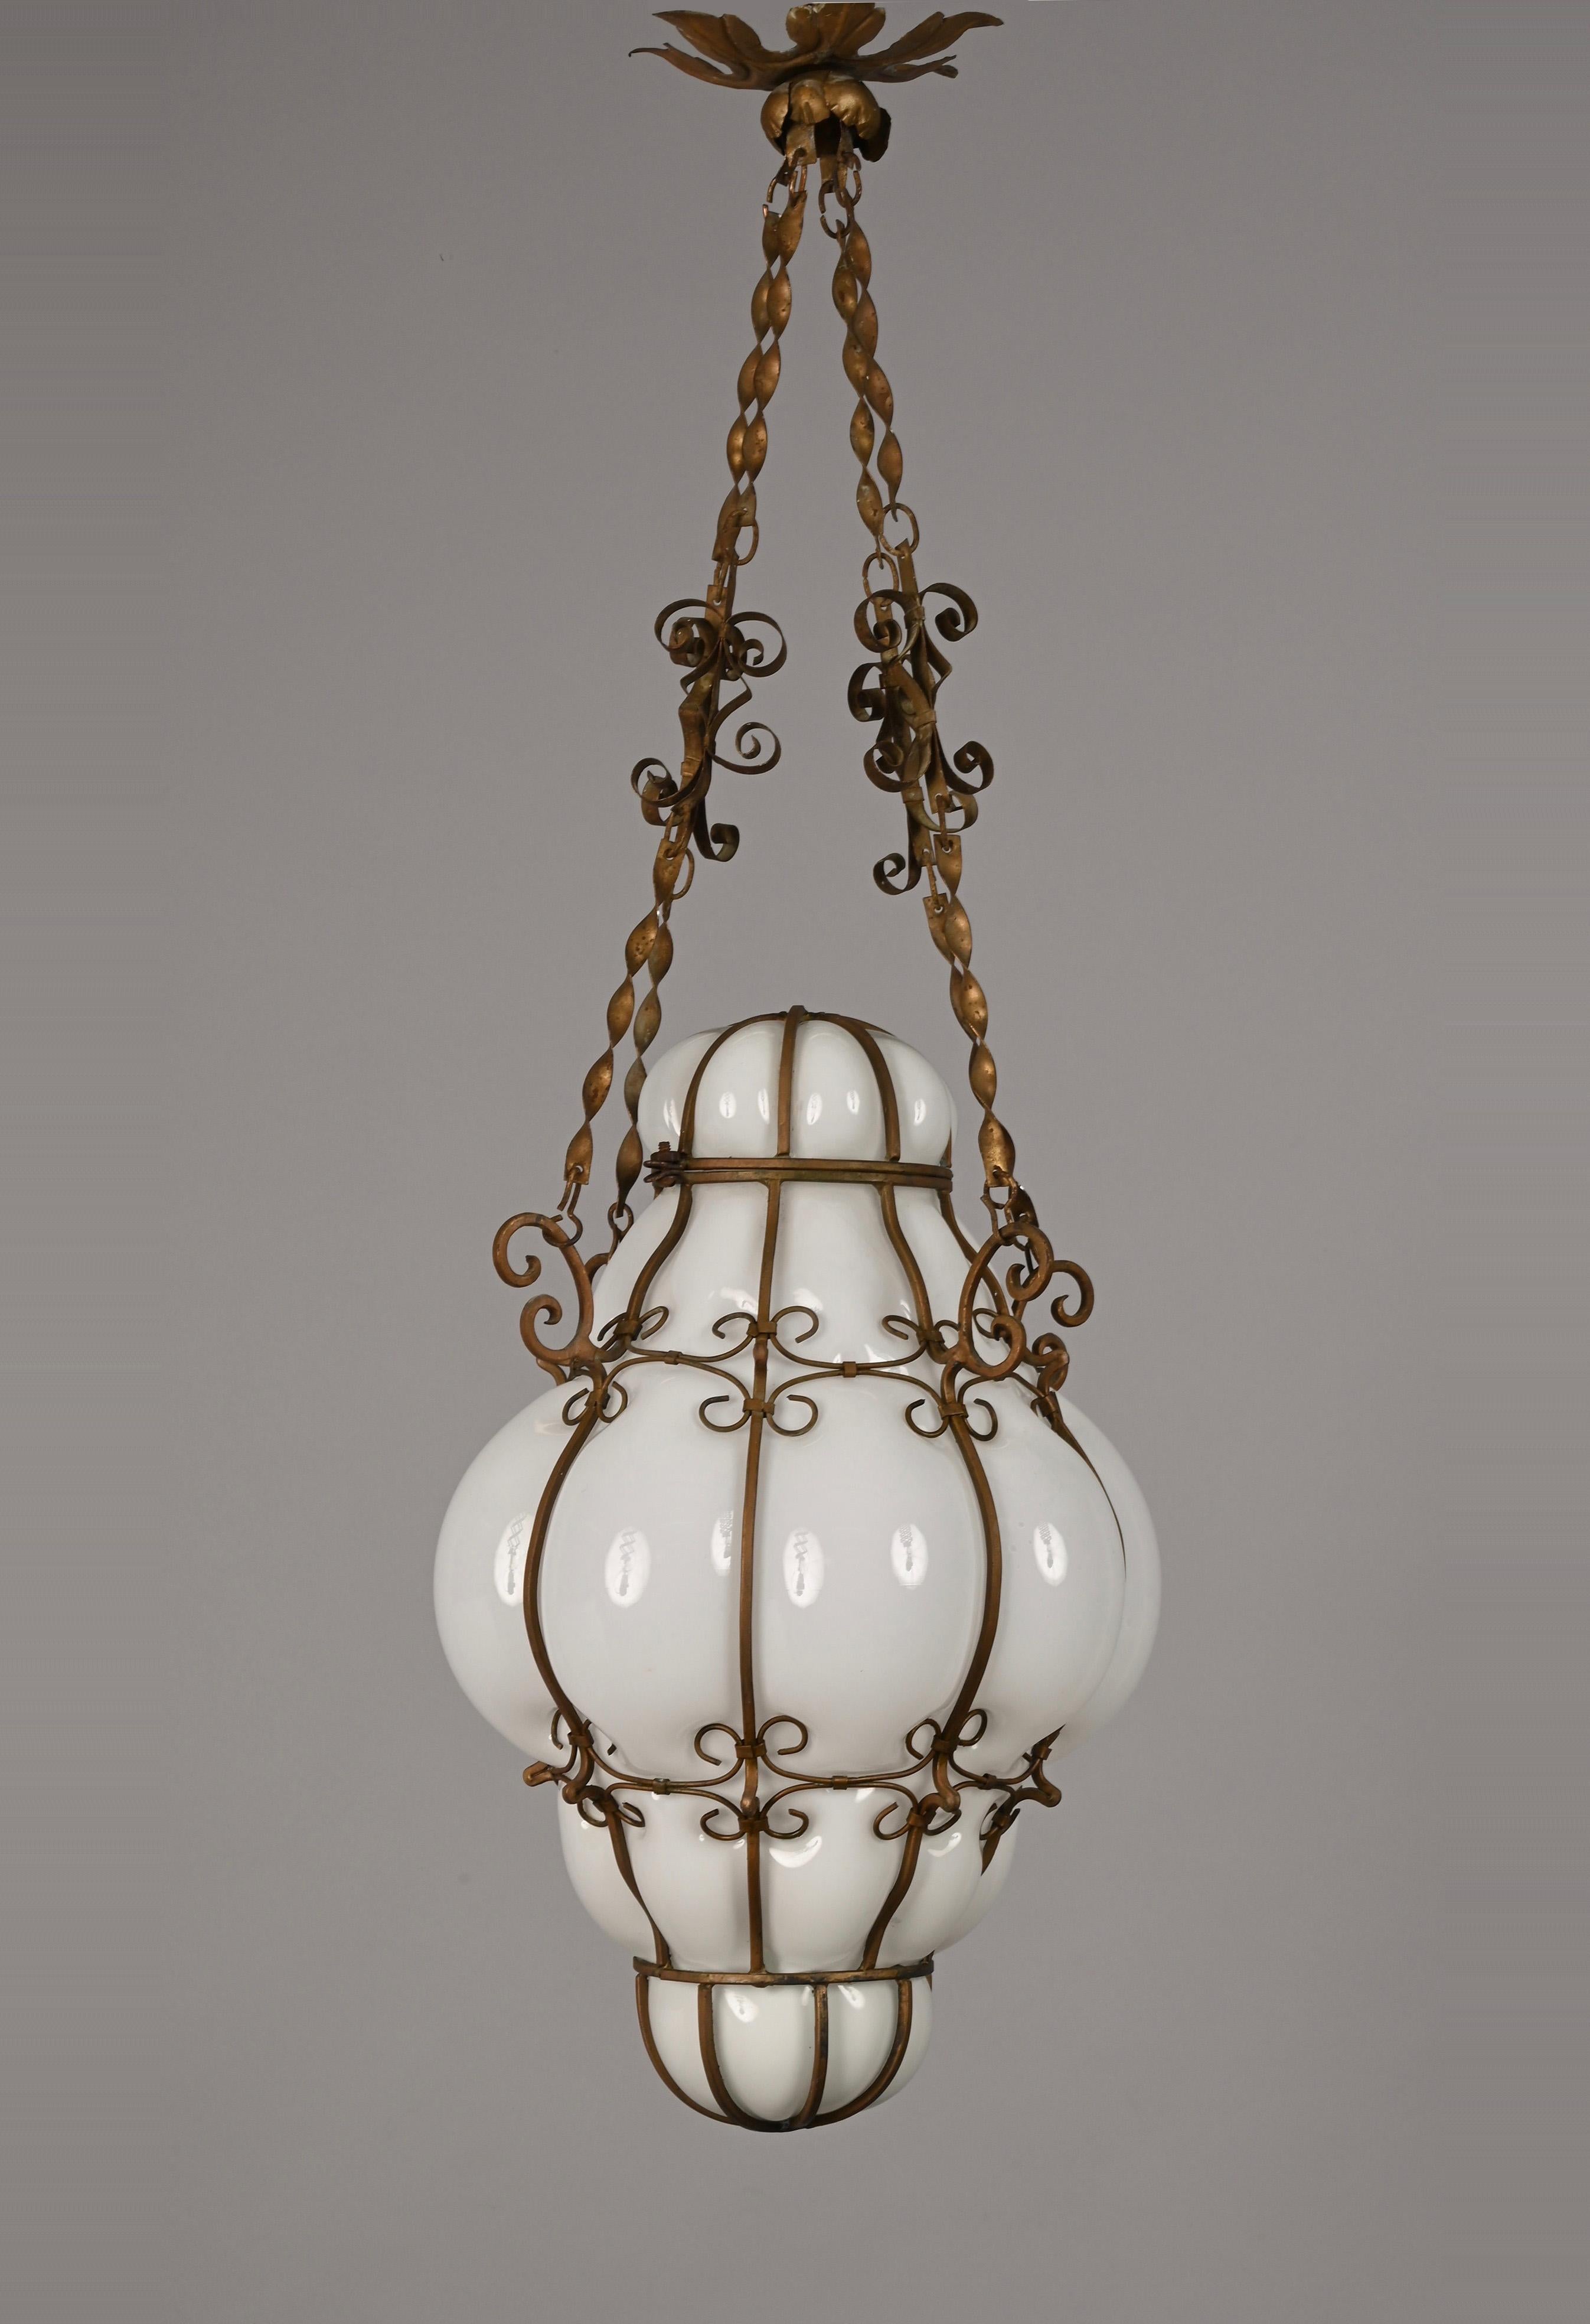 Italian Midcentury Venetian Brass and Mouth Blown Murano White Glass Chandelier, 1940s For Sale